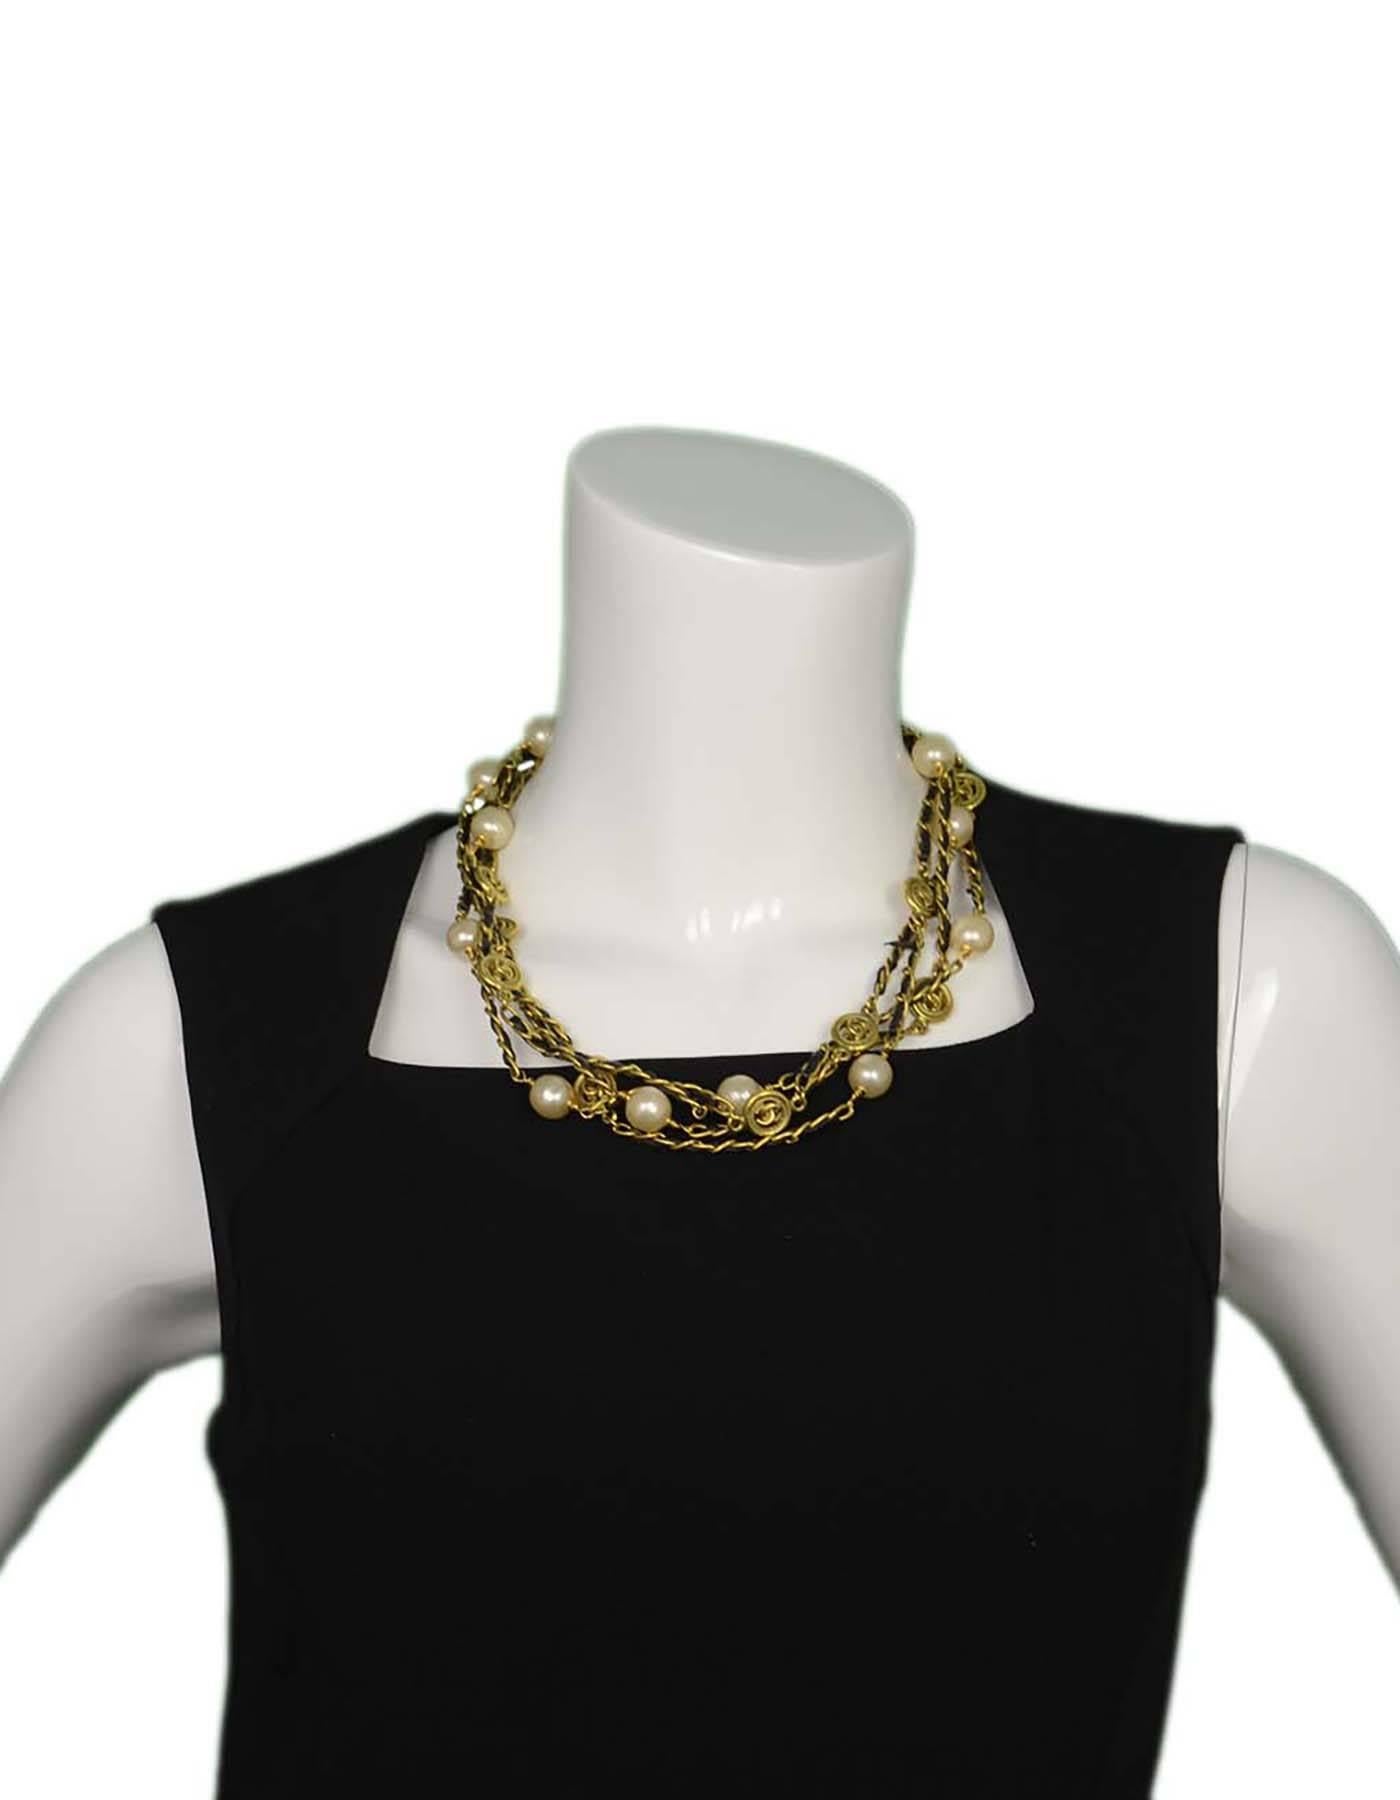 Chanel Vintage 1994 Leather Woven Gold Chain Link Necklace with Faux Pearls 3